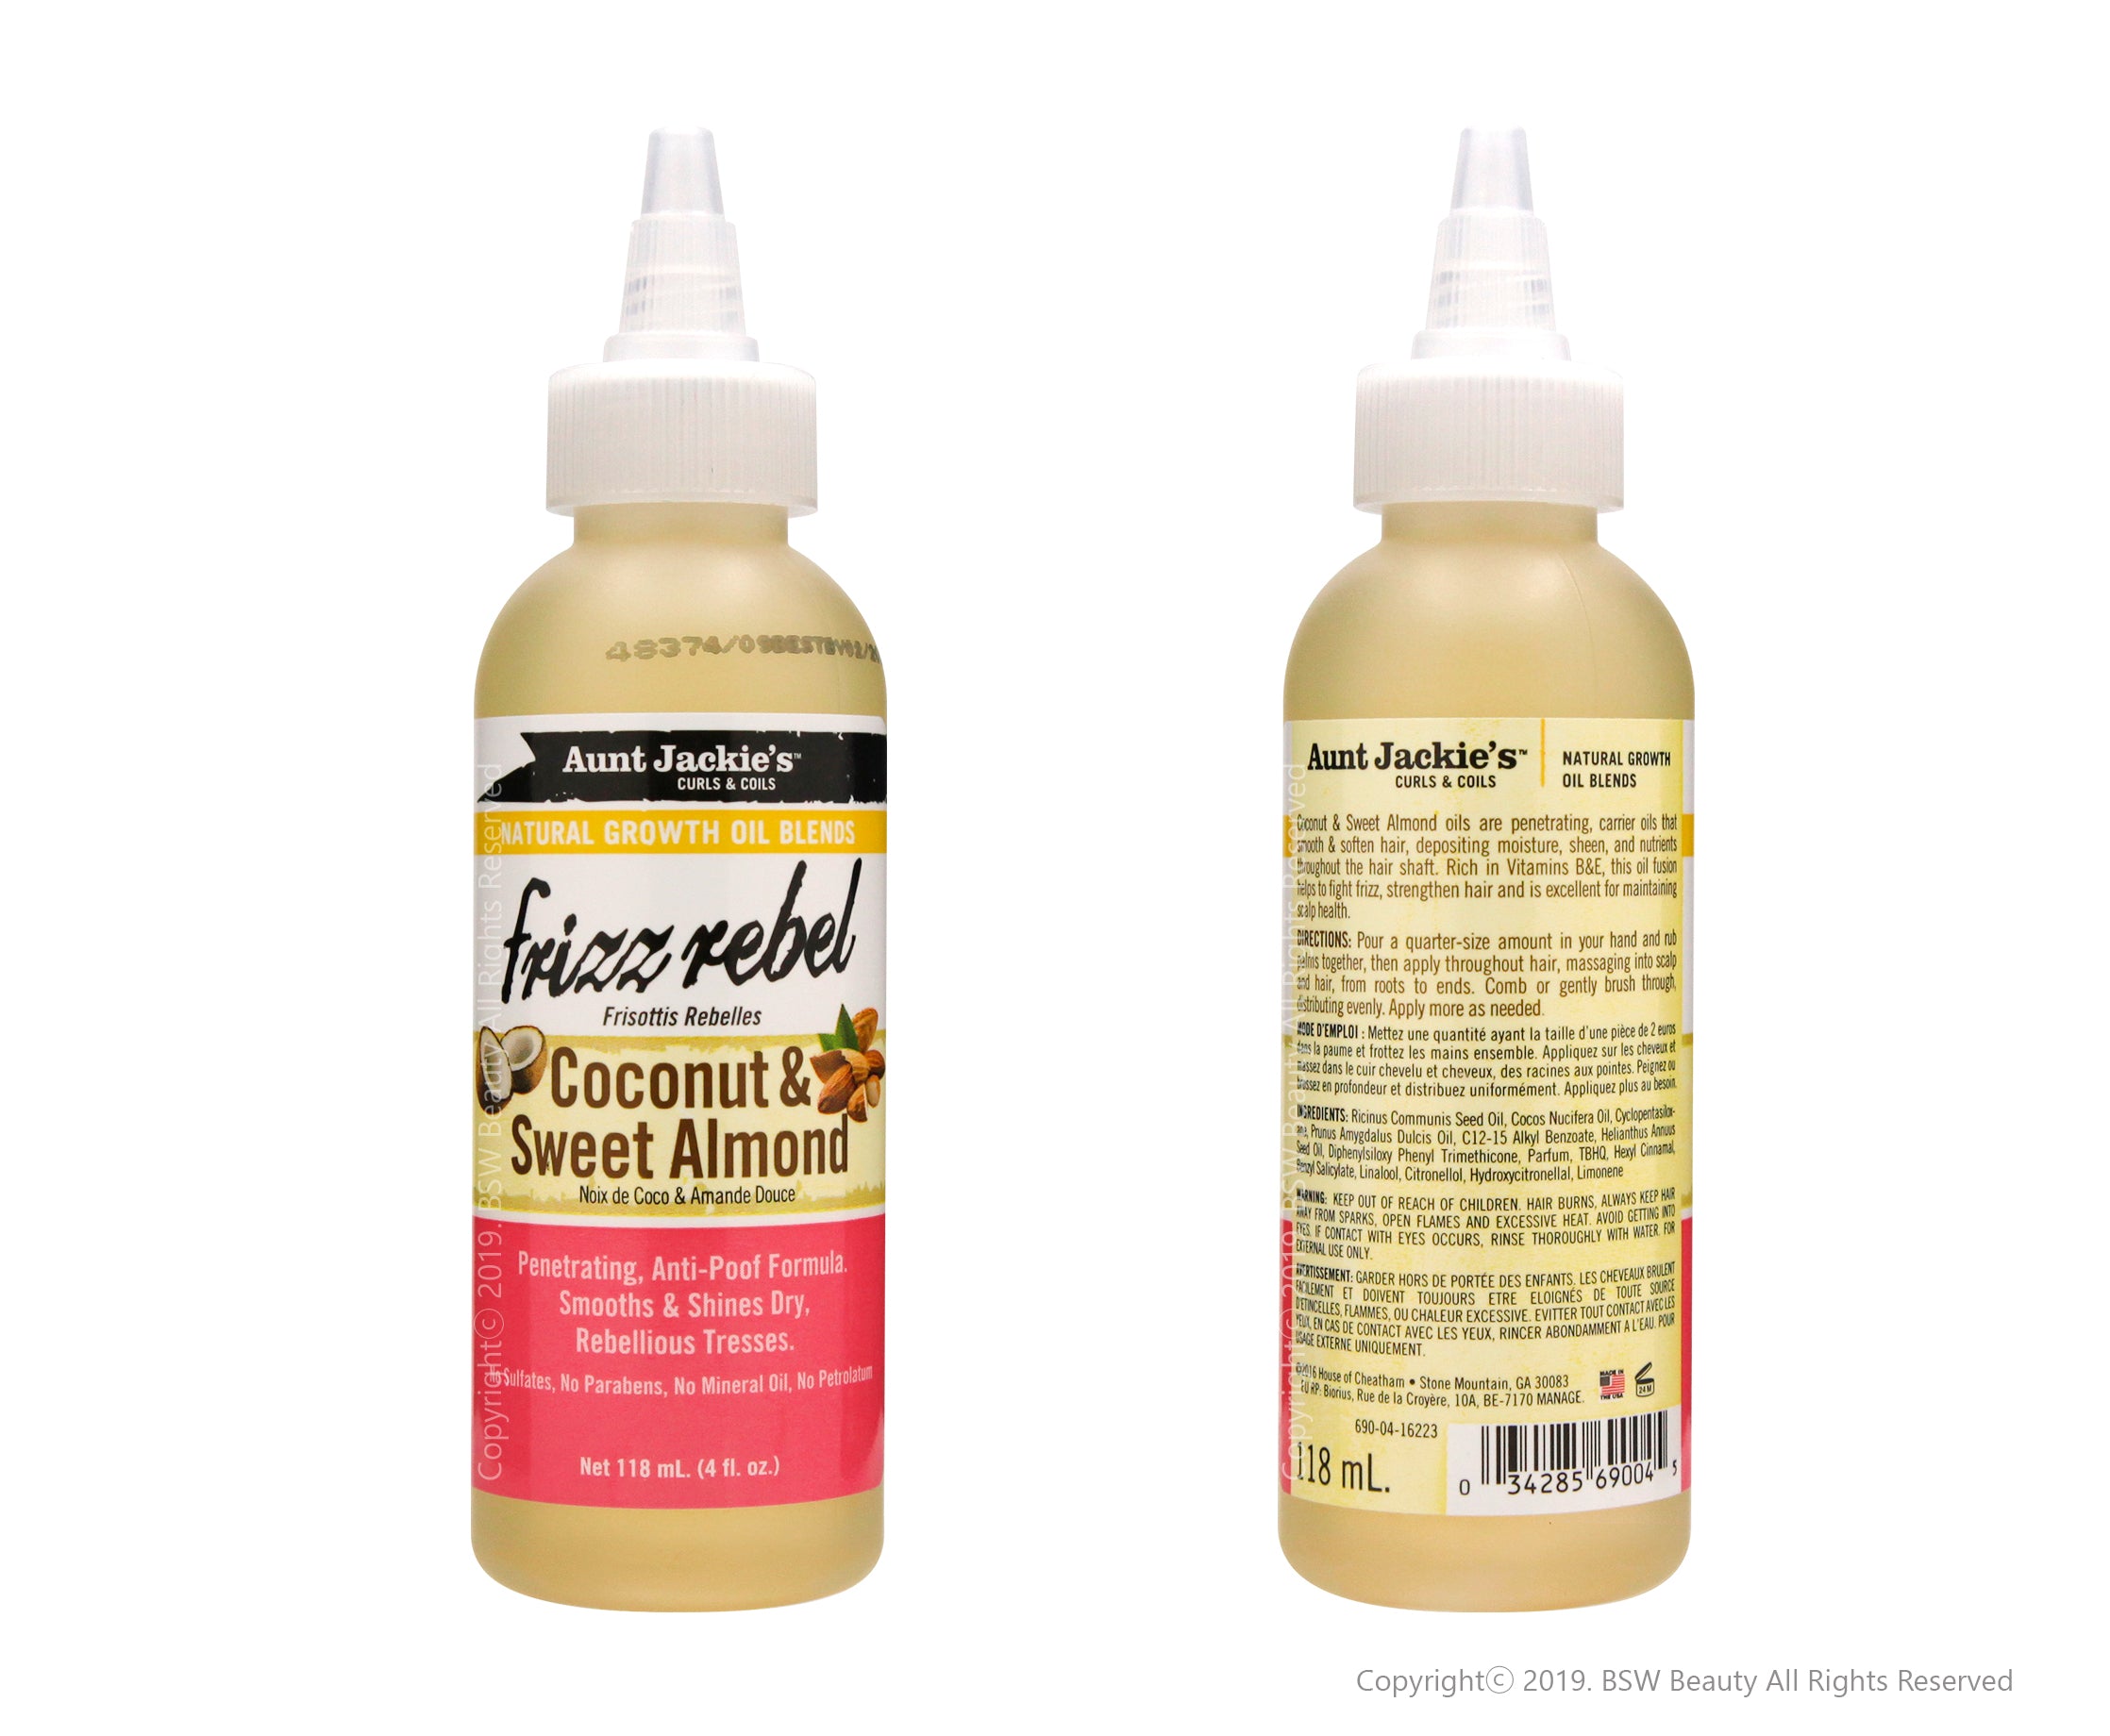 AUNT JACKIES NATURAL GROWTH OIL BLENDS FRIZZ REBEL COCONUT & SWEET ALMOND 4oz